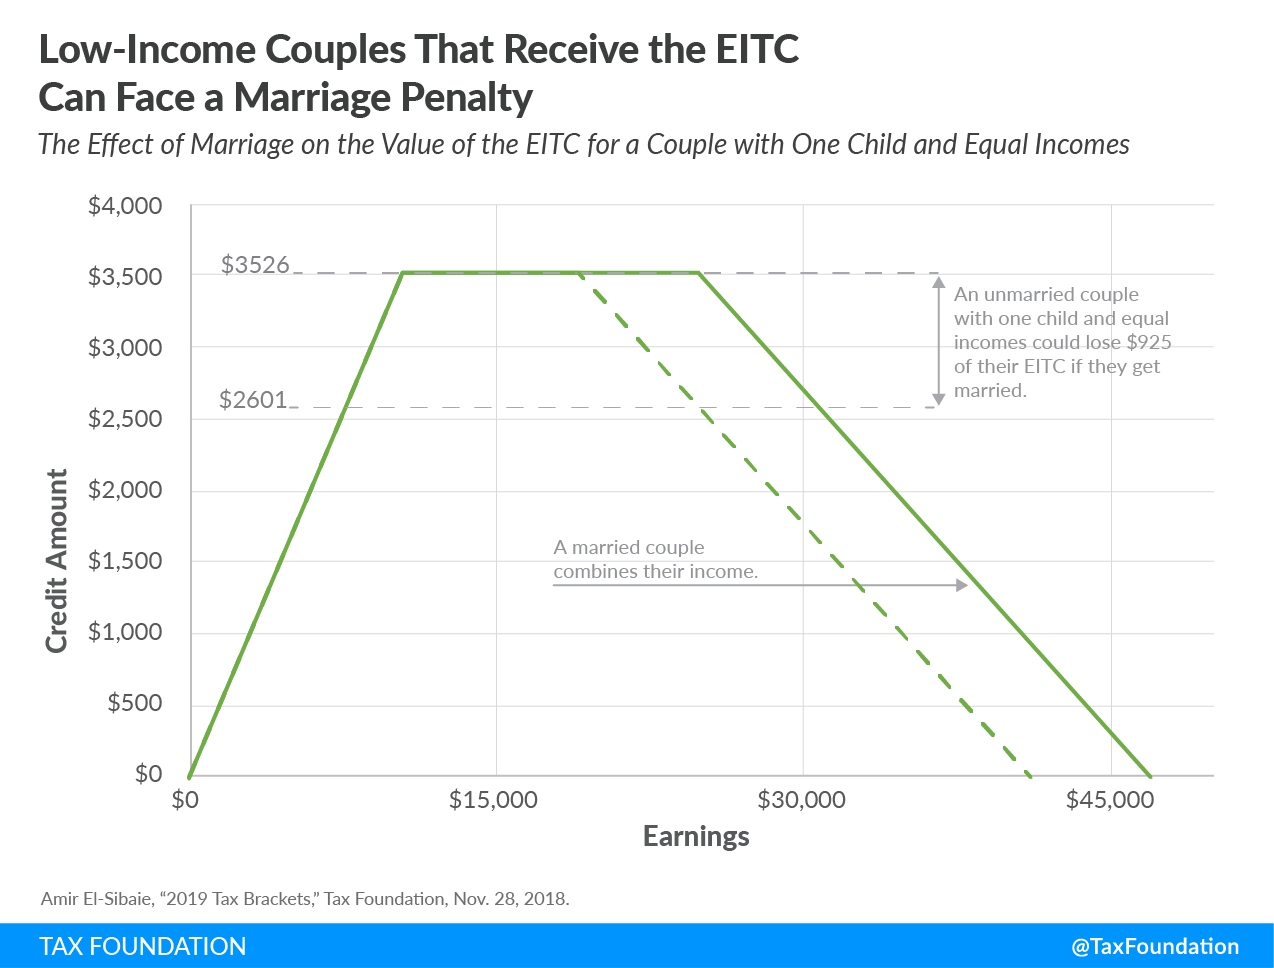 Low-income couples that receive the EITC can face a marriage penalty, earned income tax credit, EITC marriage penalty